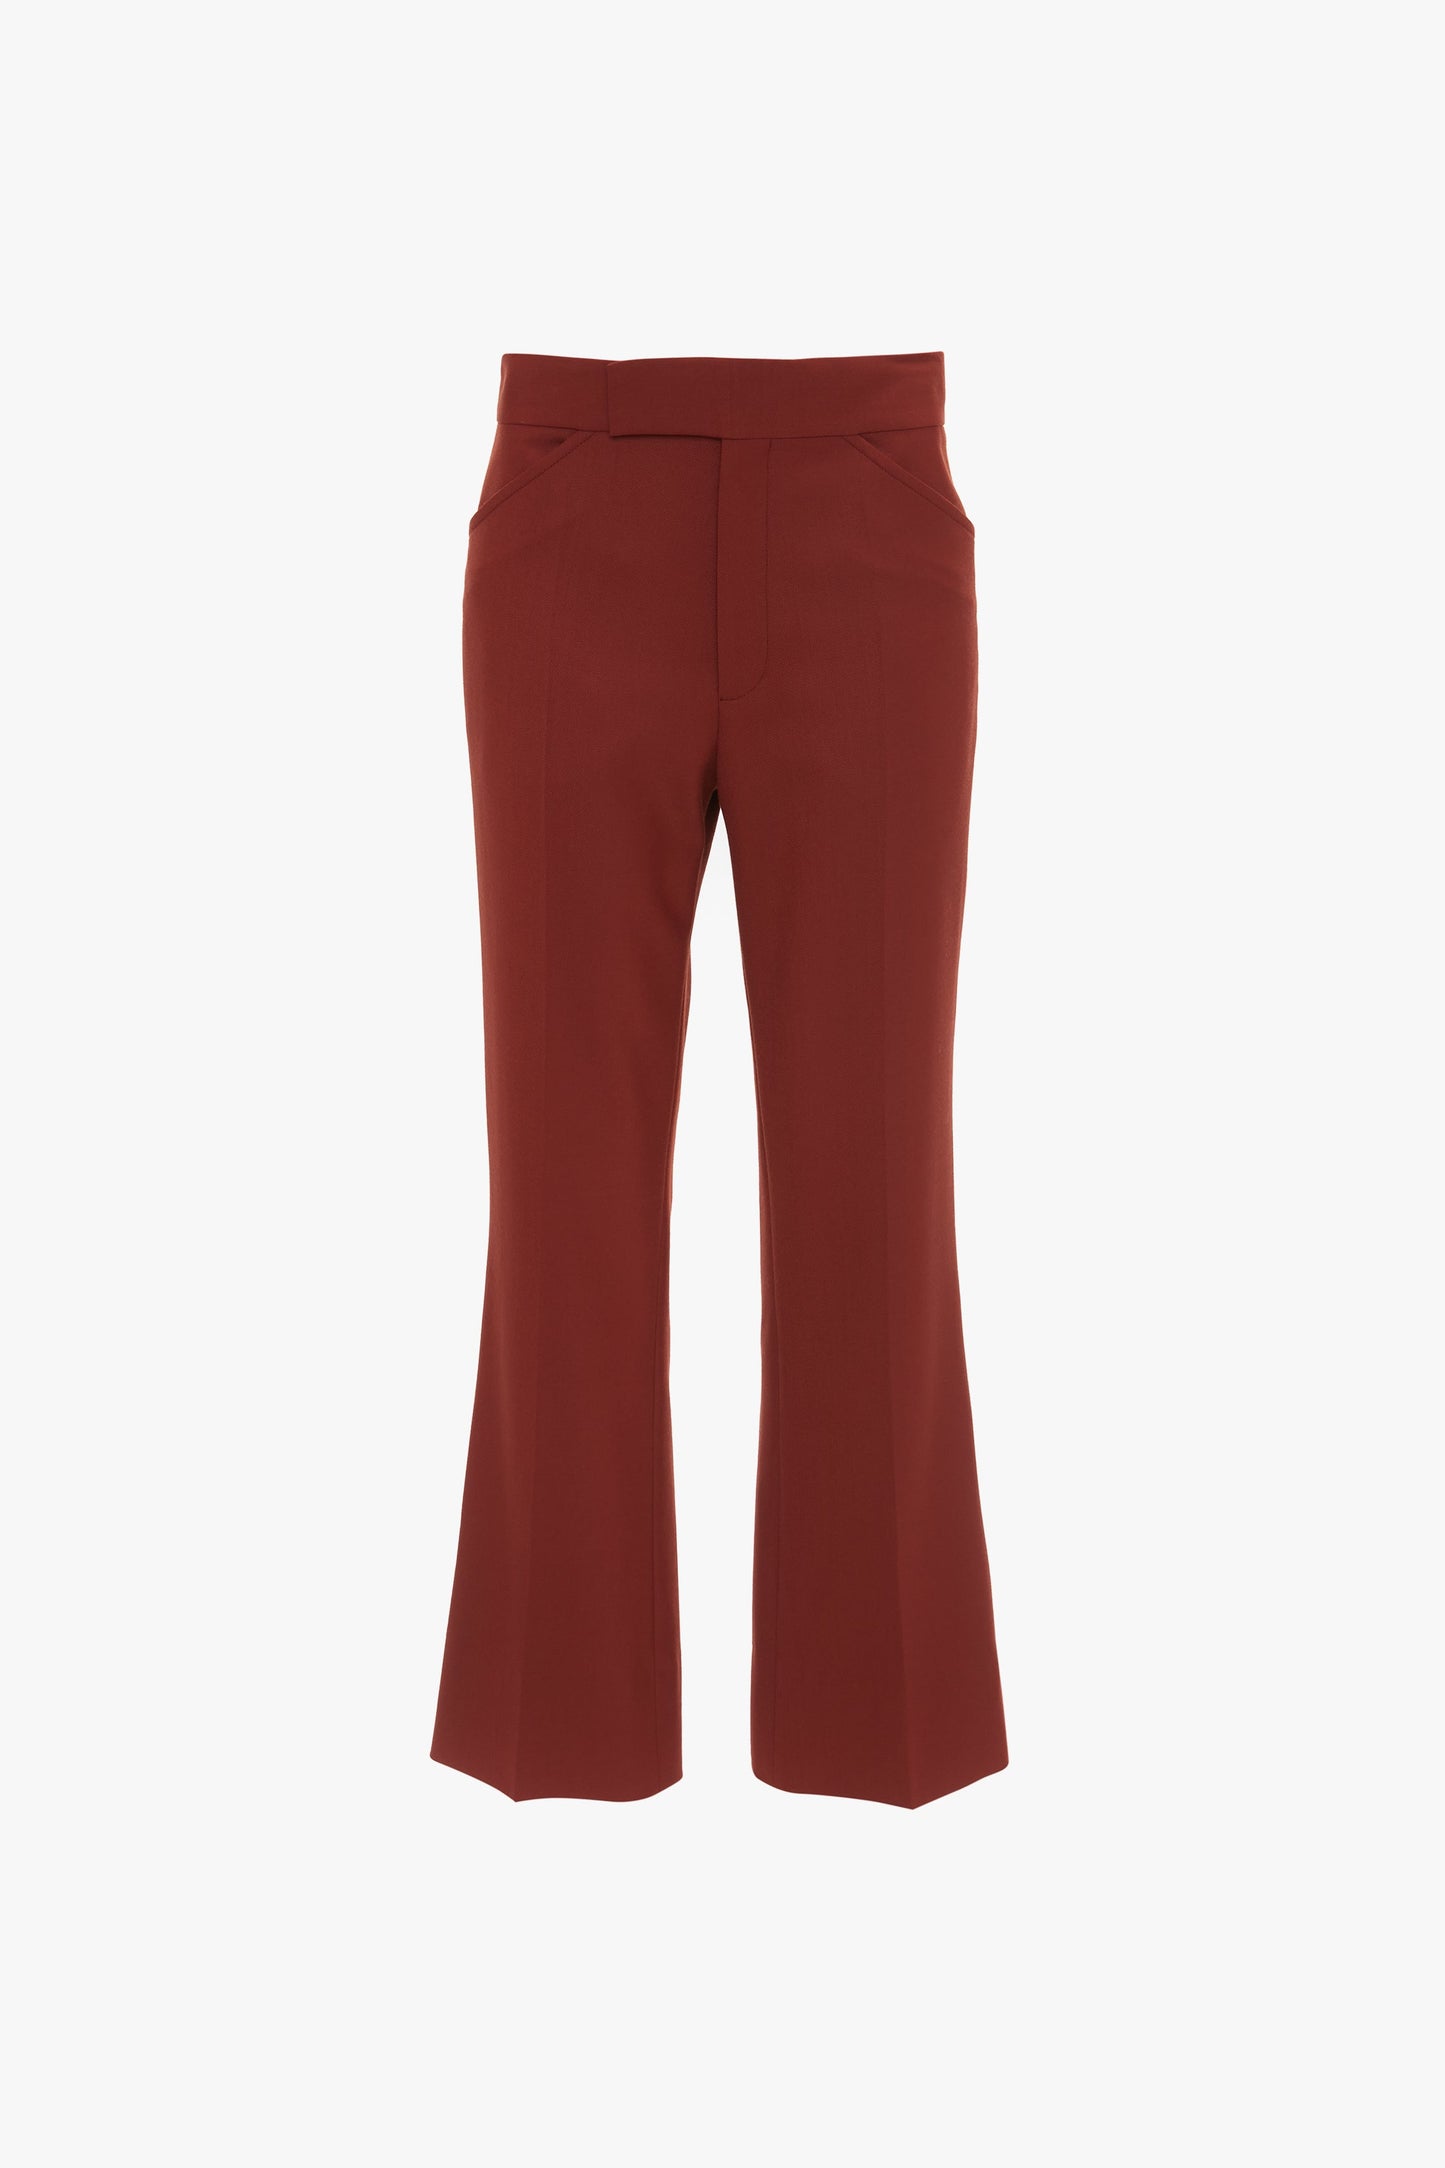 A pair of Wide Cropped Flare Trouser In Russet by Victoria Beckham, with a fitted waistband and front pockets, displayed against a white background.